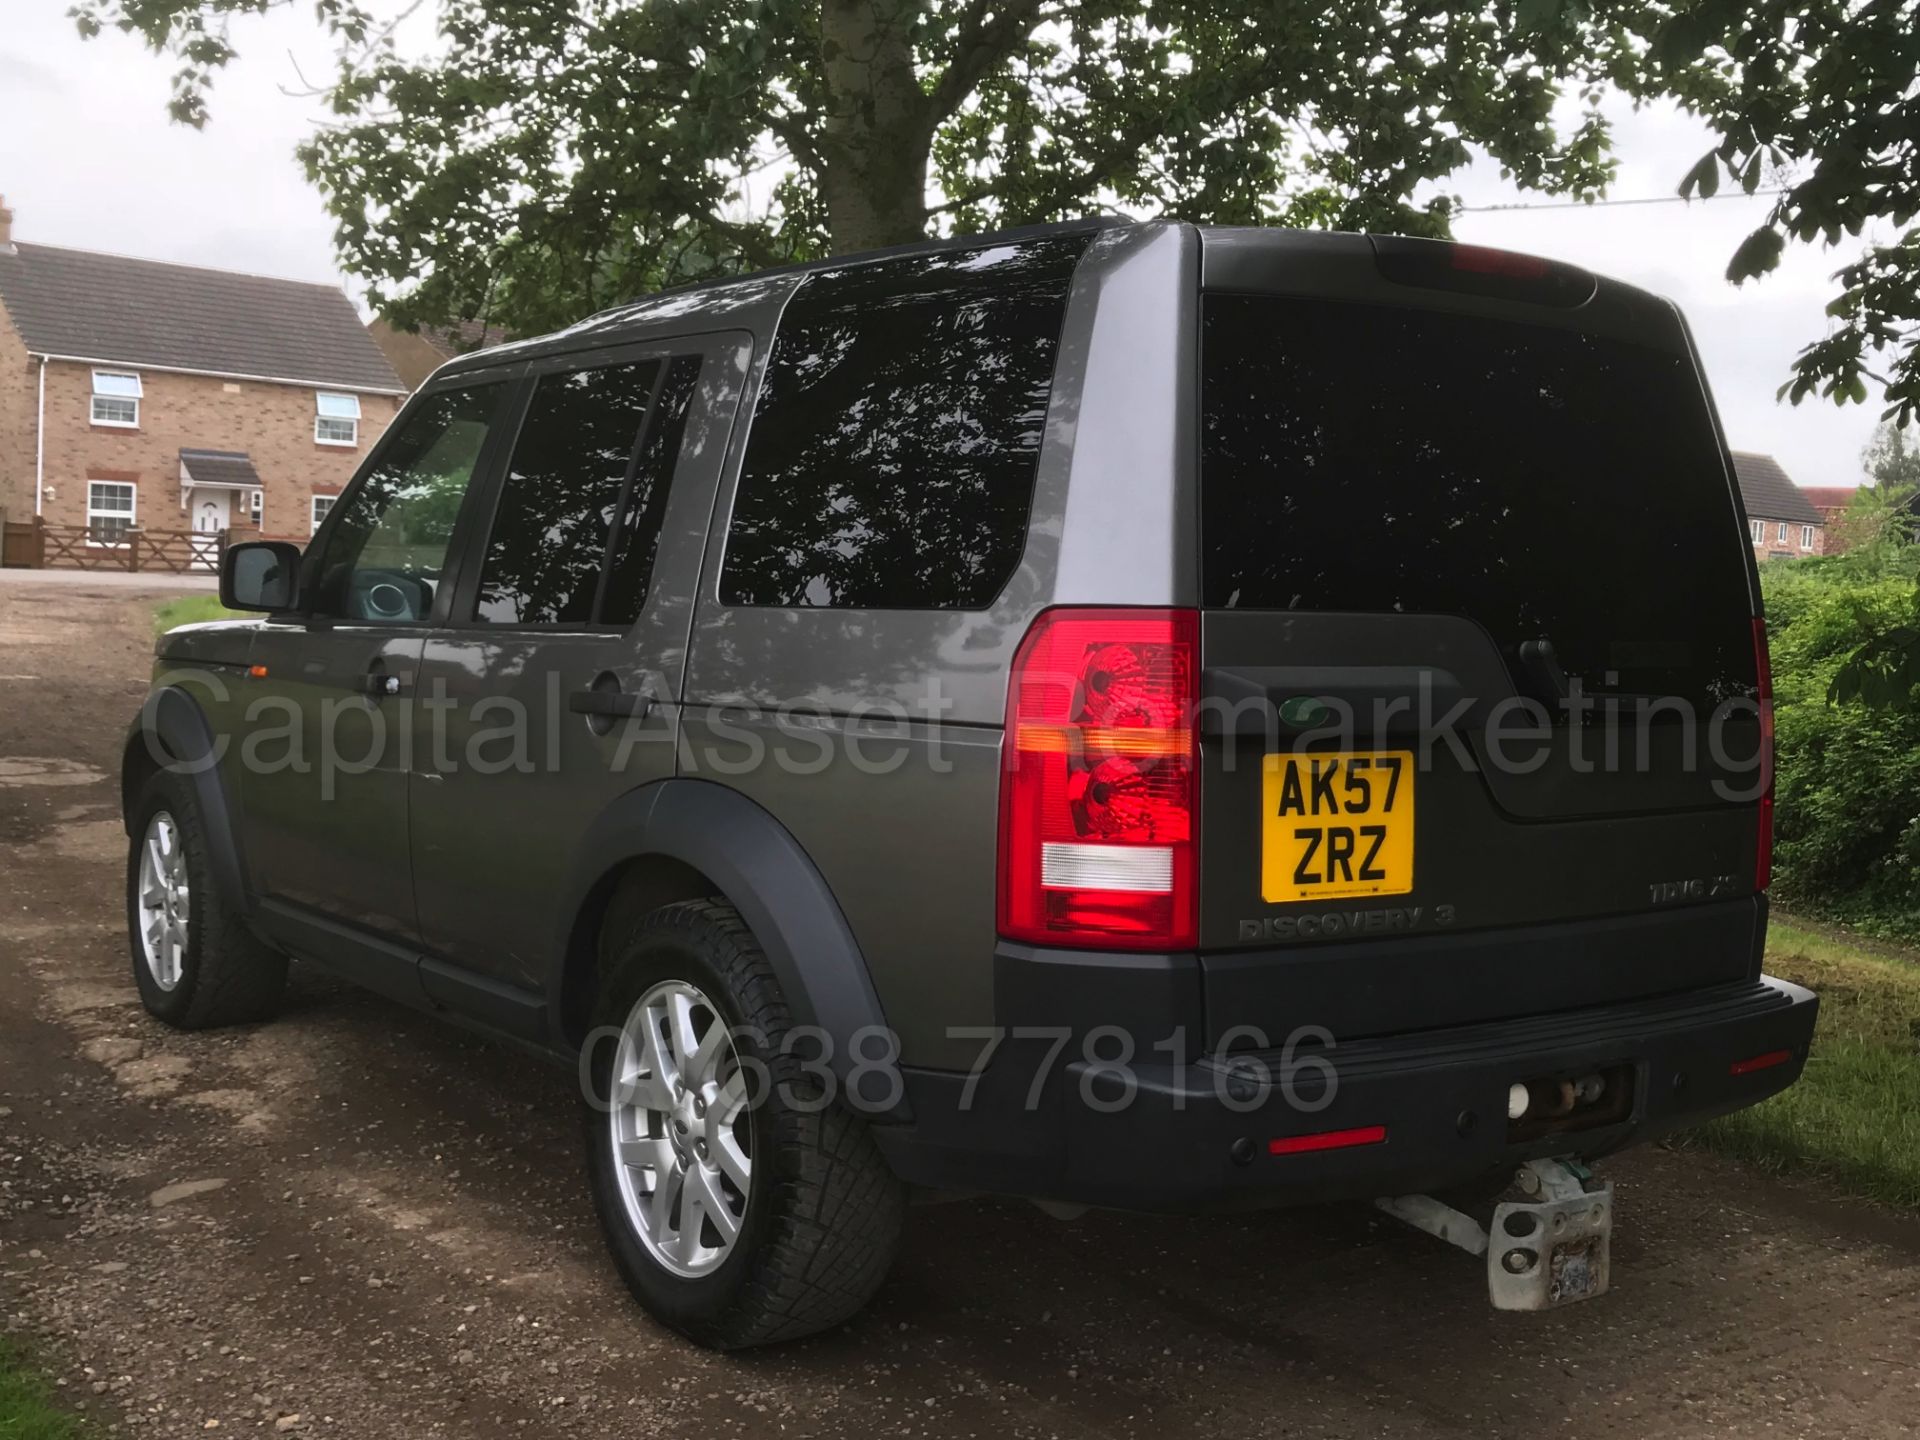 (On Sale) LAND ROVER DISCOVERY 3 'XS EDITION' **COMMERCIAL VAN**(2008 MODEL) 'TDV6-190 BHP' (NO VAT) - Image 7 of 38